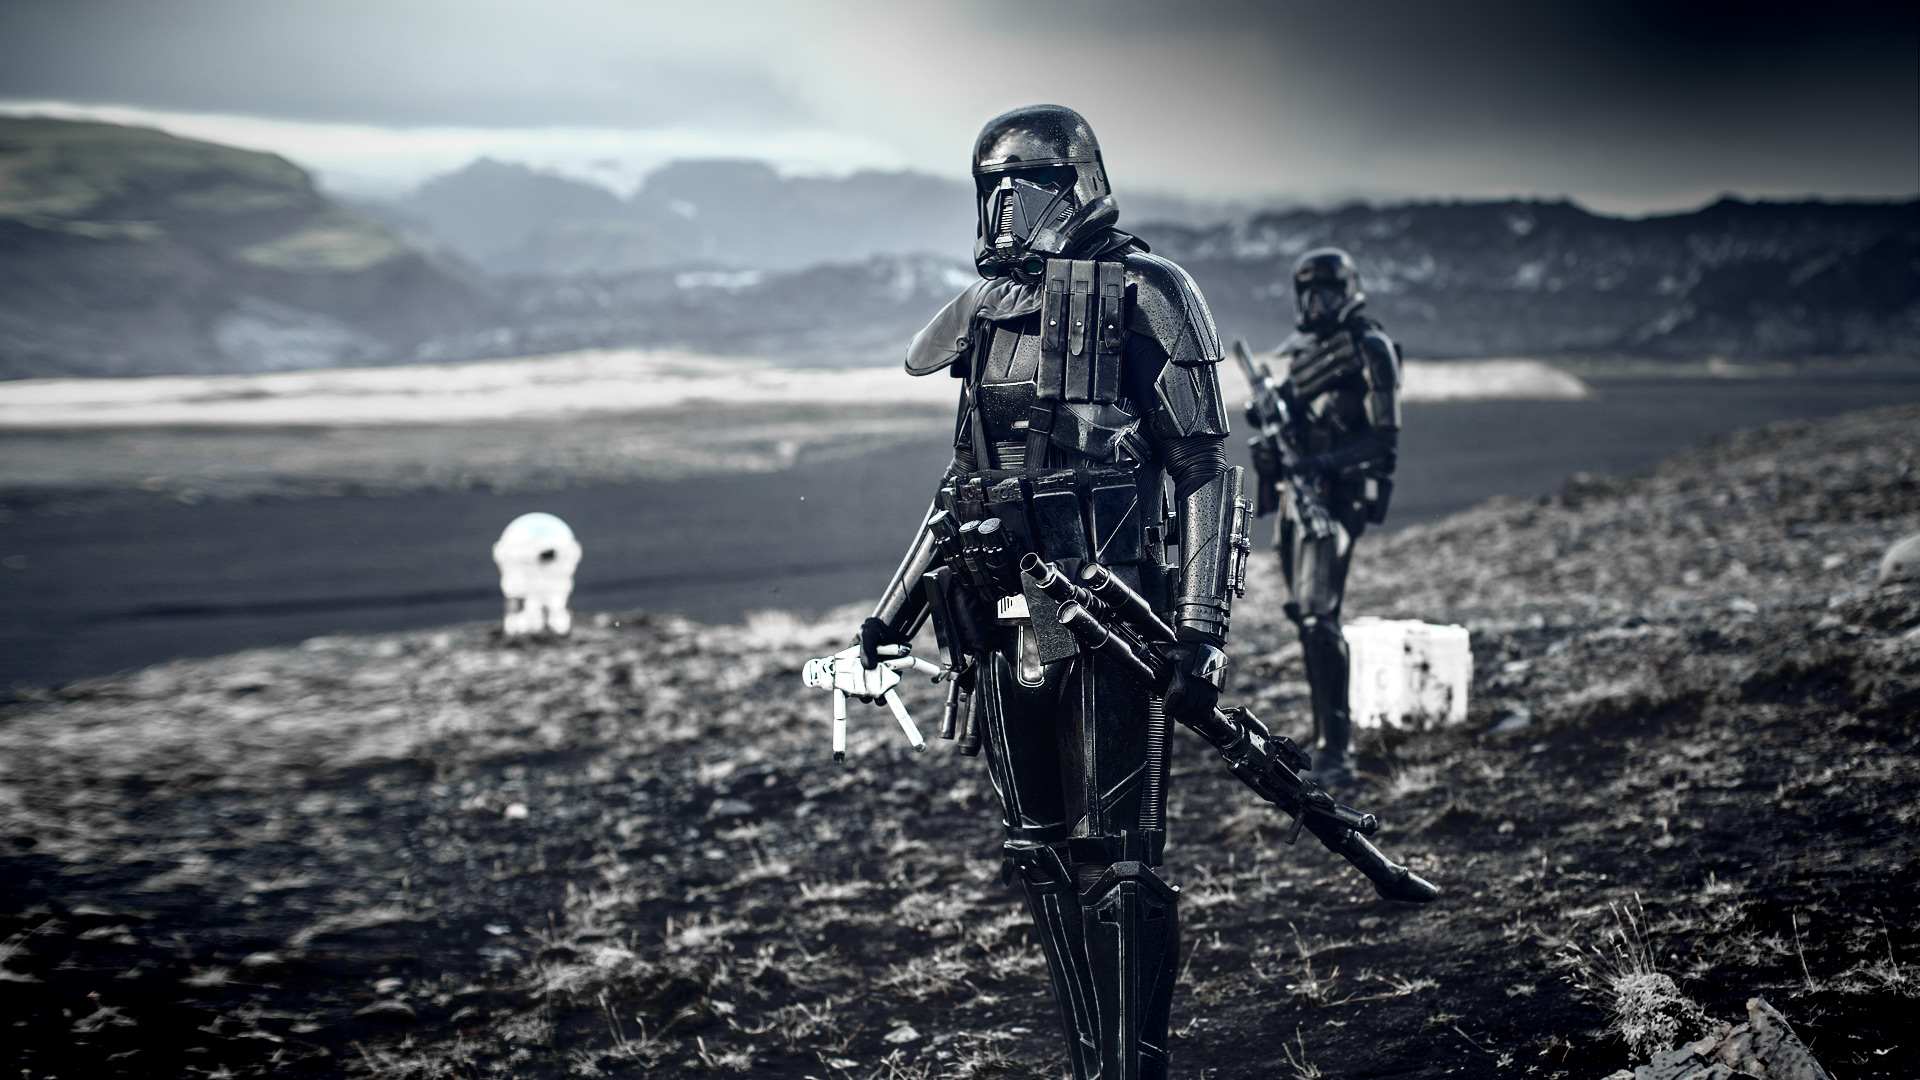 star wars wallpaper 1920x1080,personal protective equipment,photography,soldier,stock photography,fell